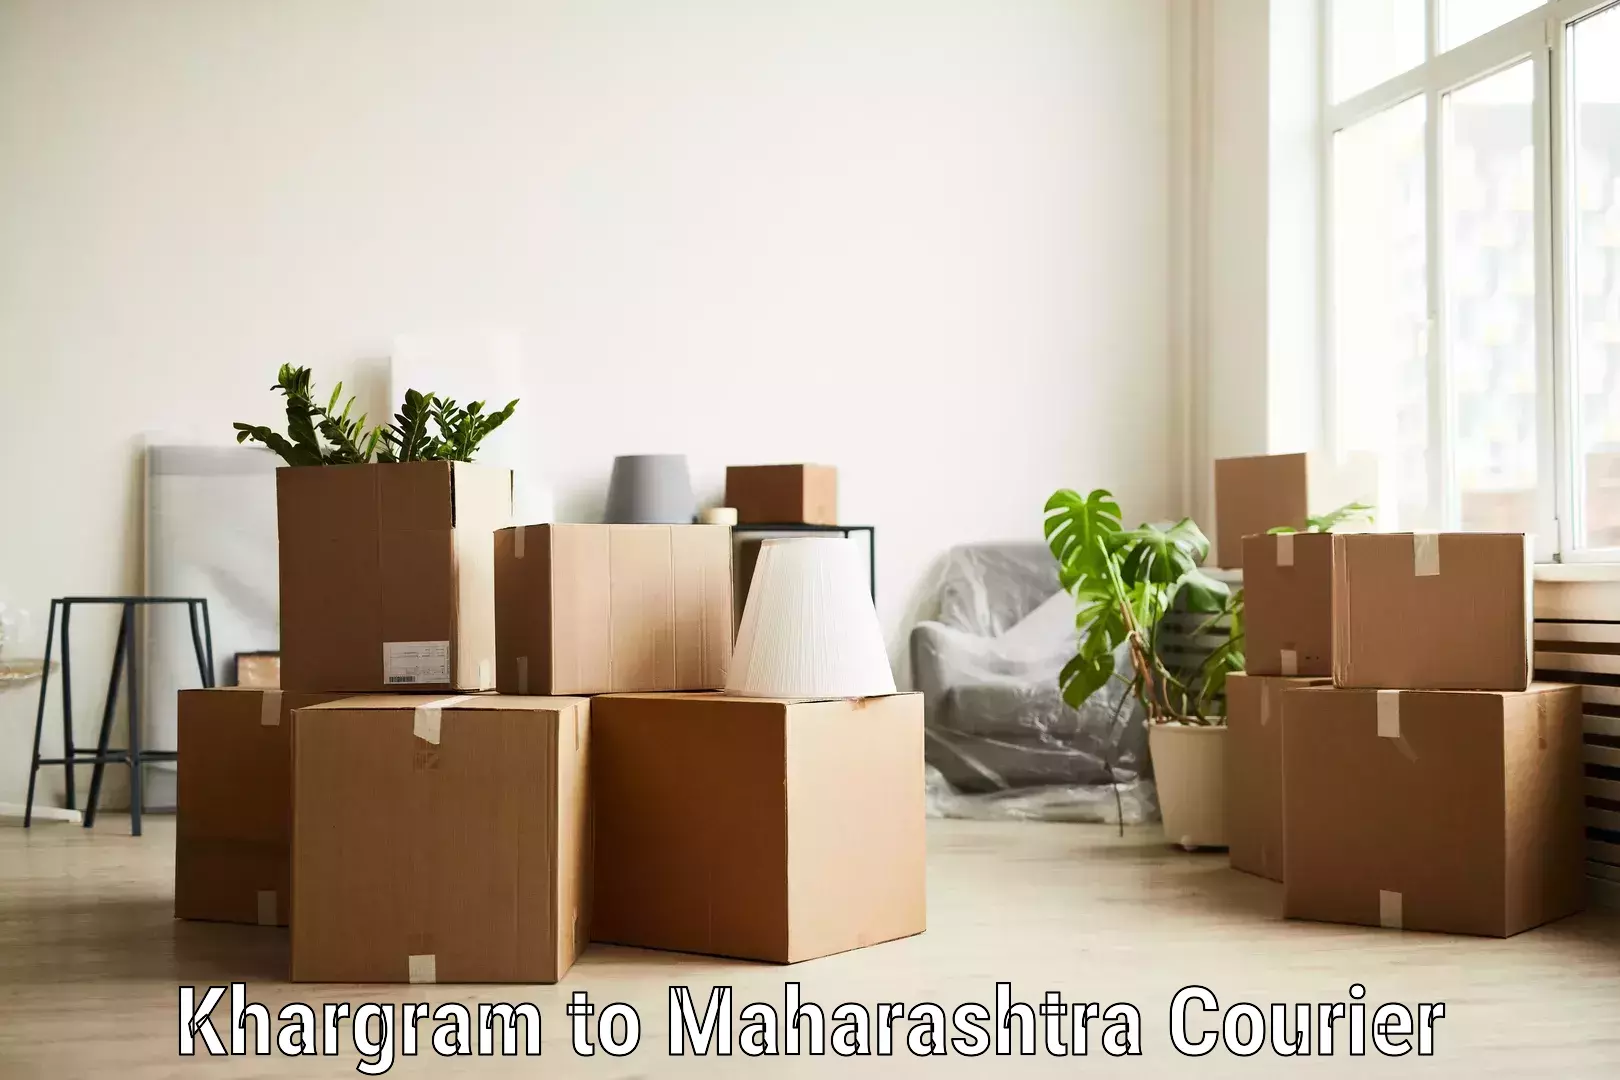 Quality courier services in Khargram to Panvel